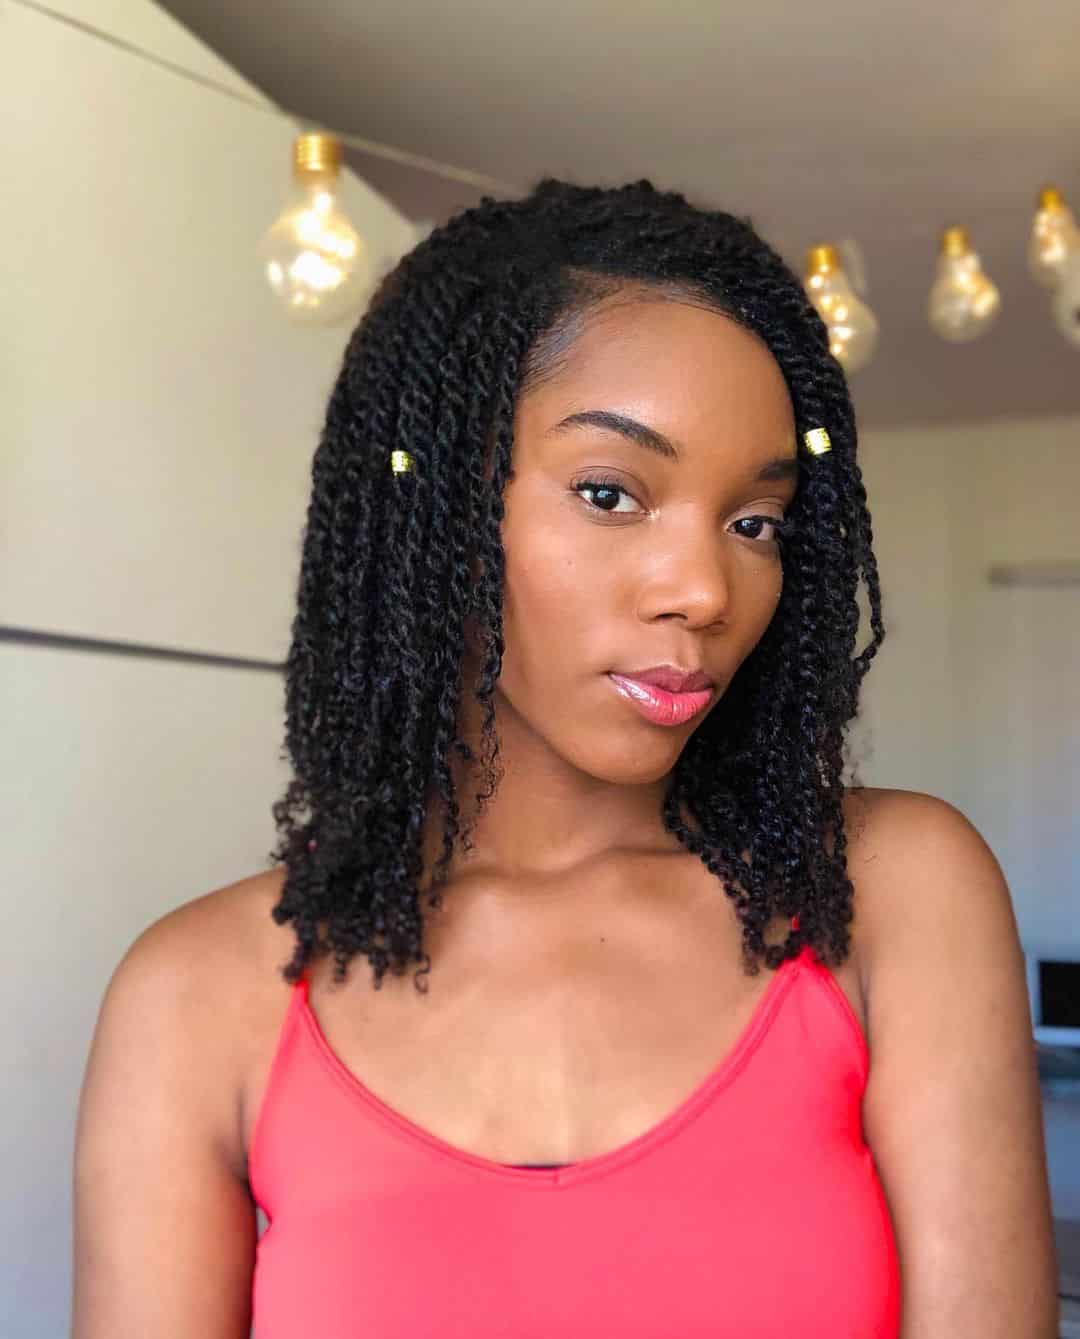 13 Killer Kinky Twist Hairstyles You’ve Gotta Check Out